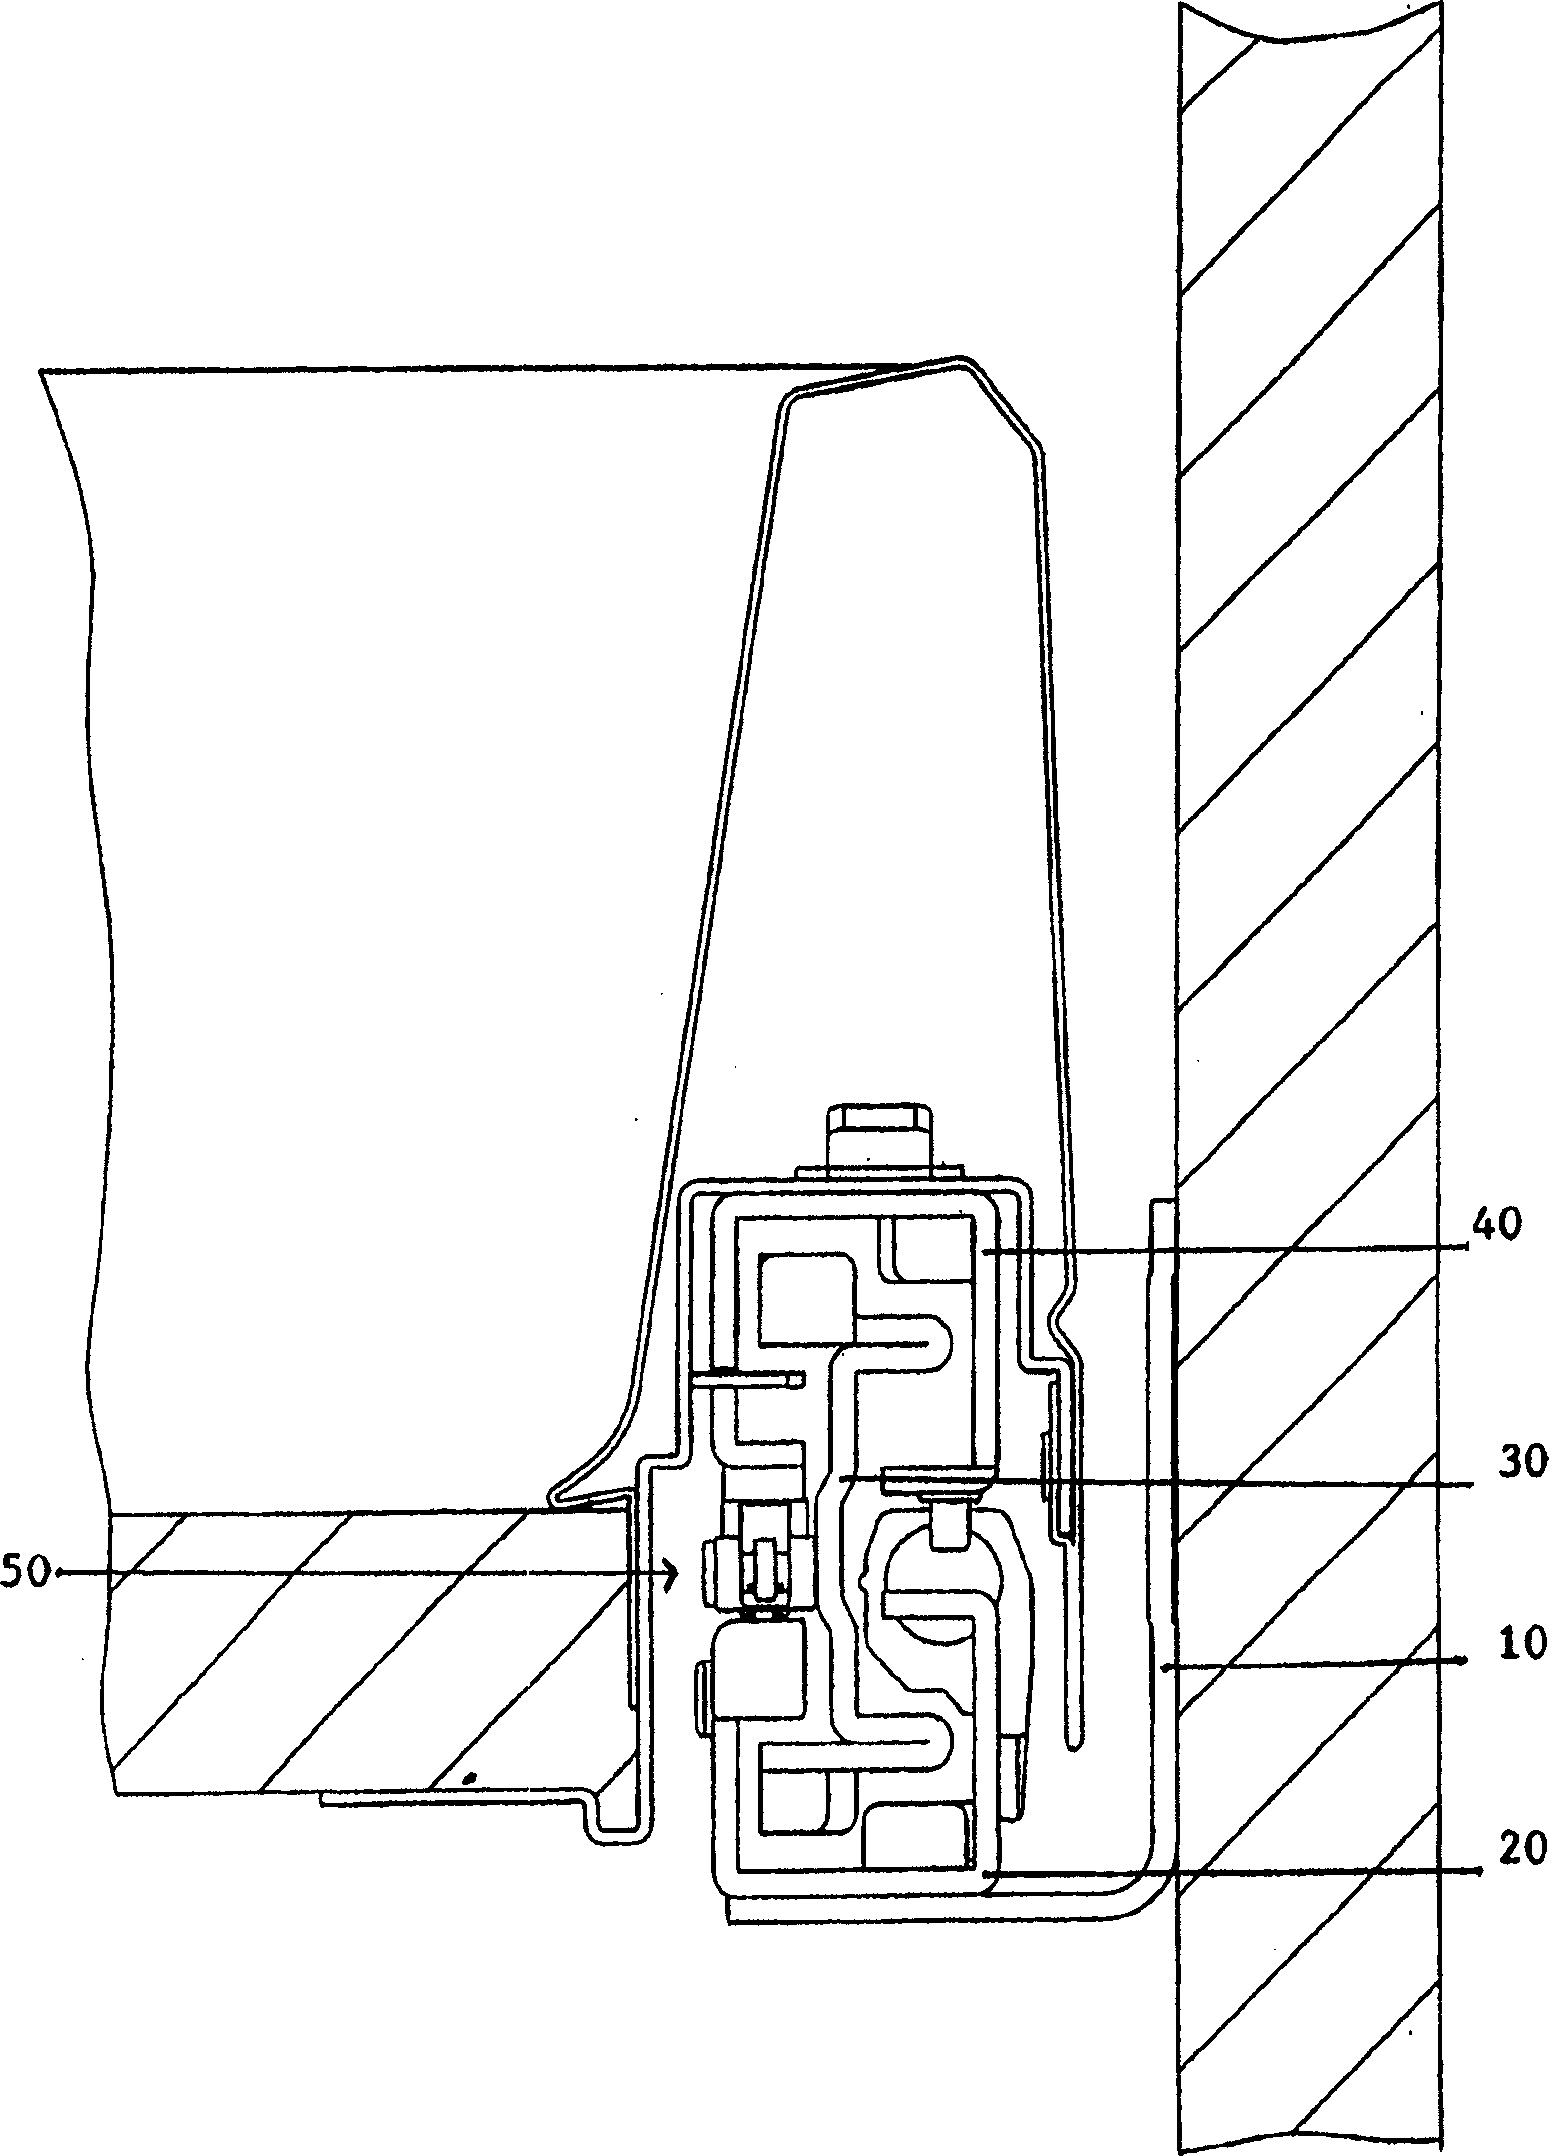 Drawer guide rail assembly